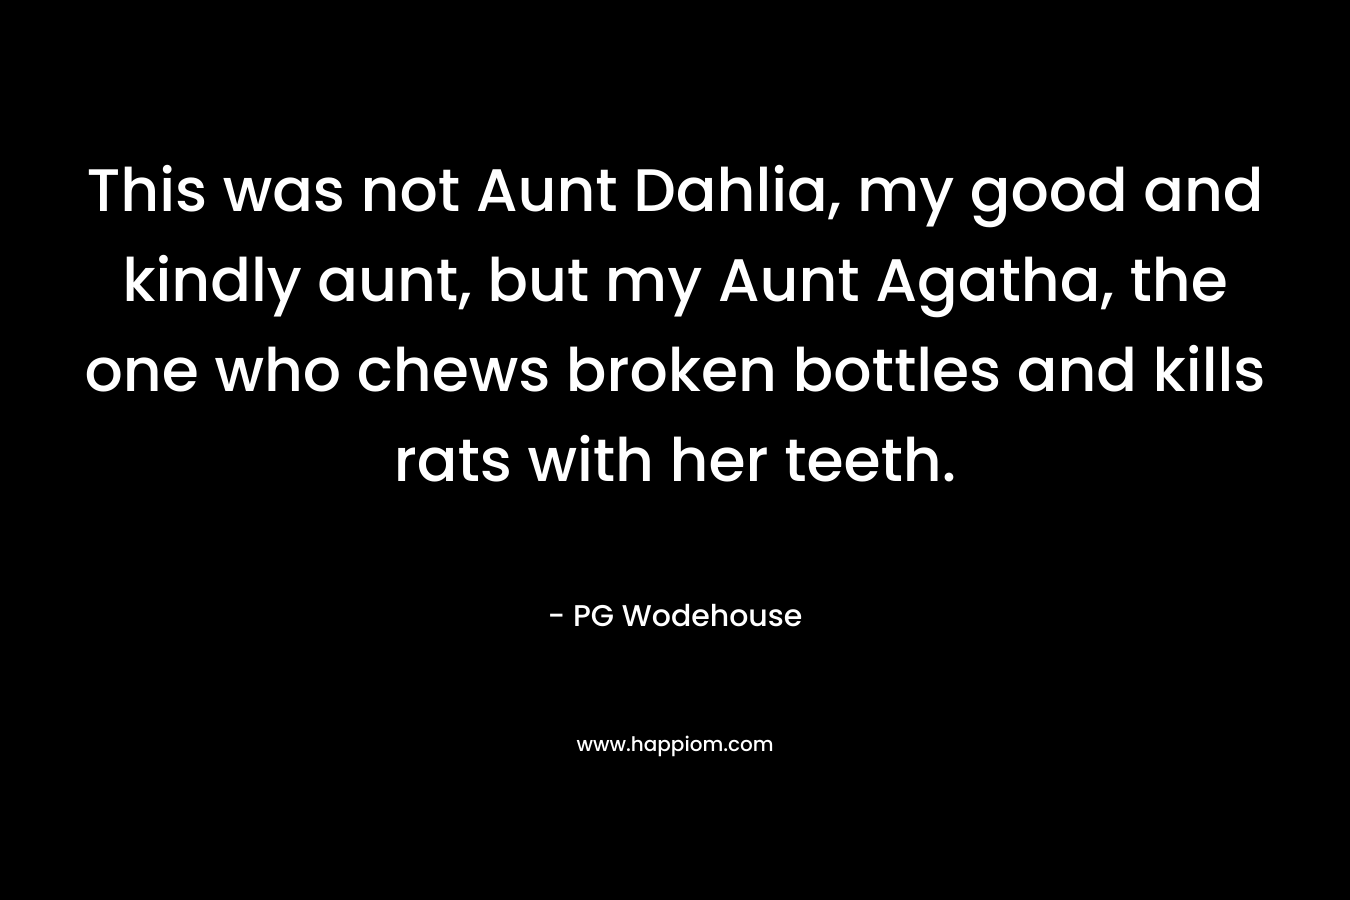 This was not Aunt Dahlia, my good and kindly aunt, but my Aunt Agatha, the one who chews broken bottles and kills rats with her teeth.